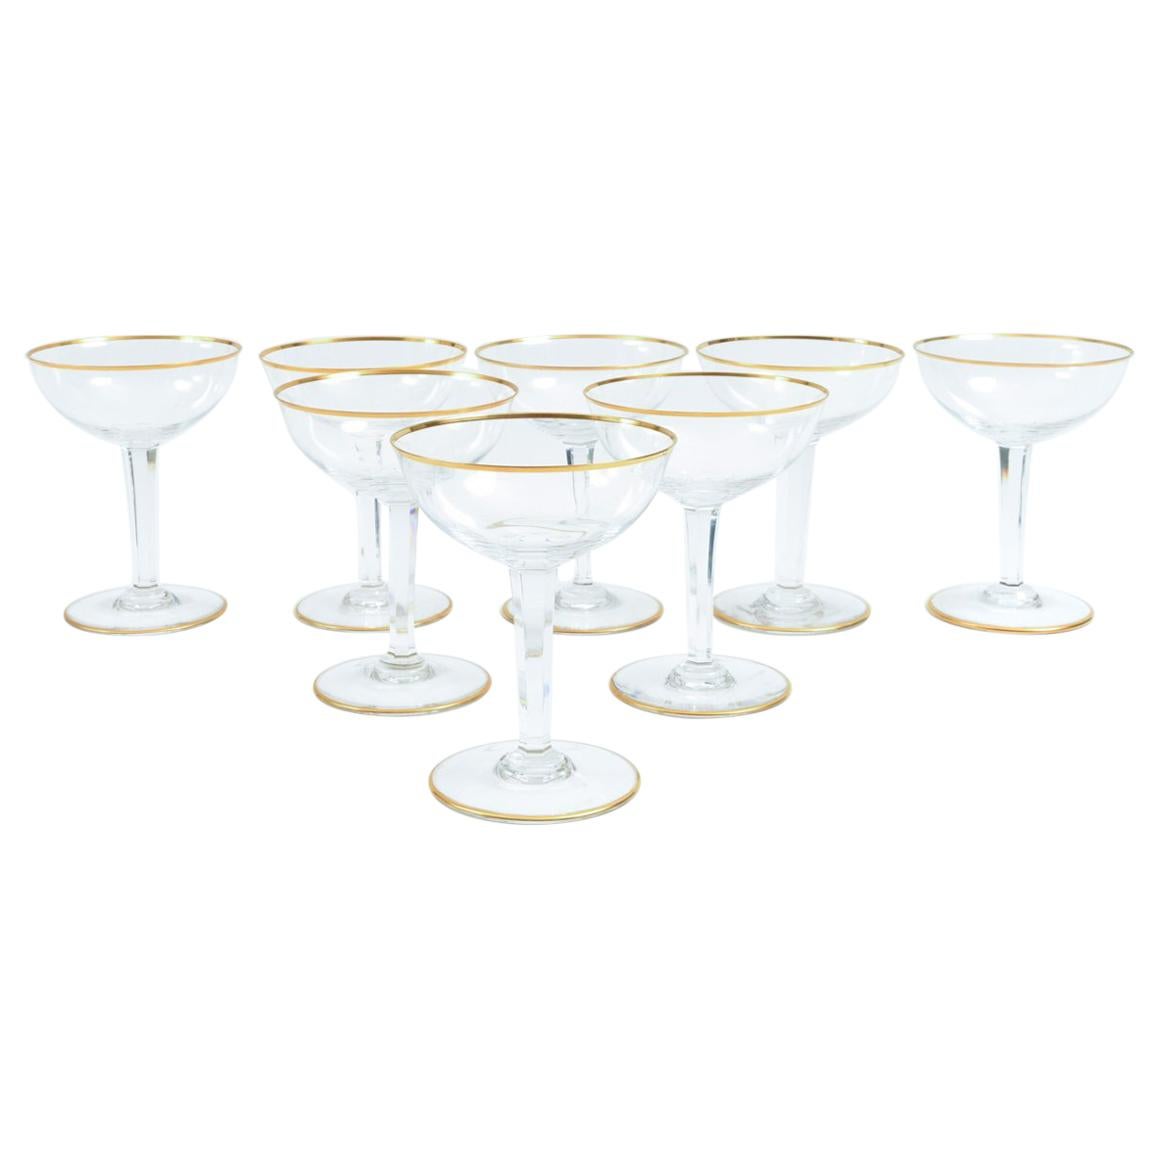 Vintage Baccarat Crystal Barware Champagne Coupe Service for Eight People